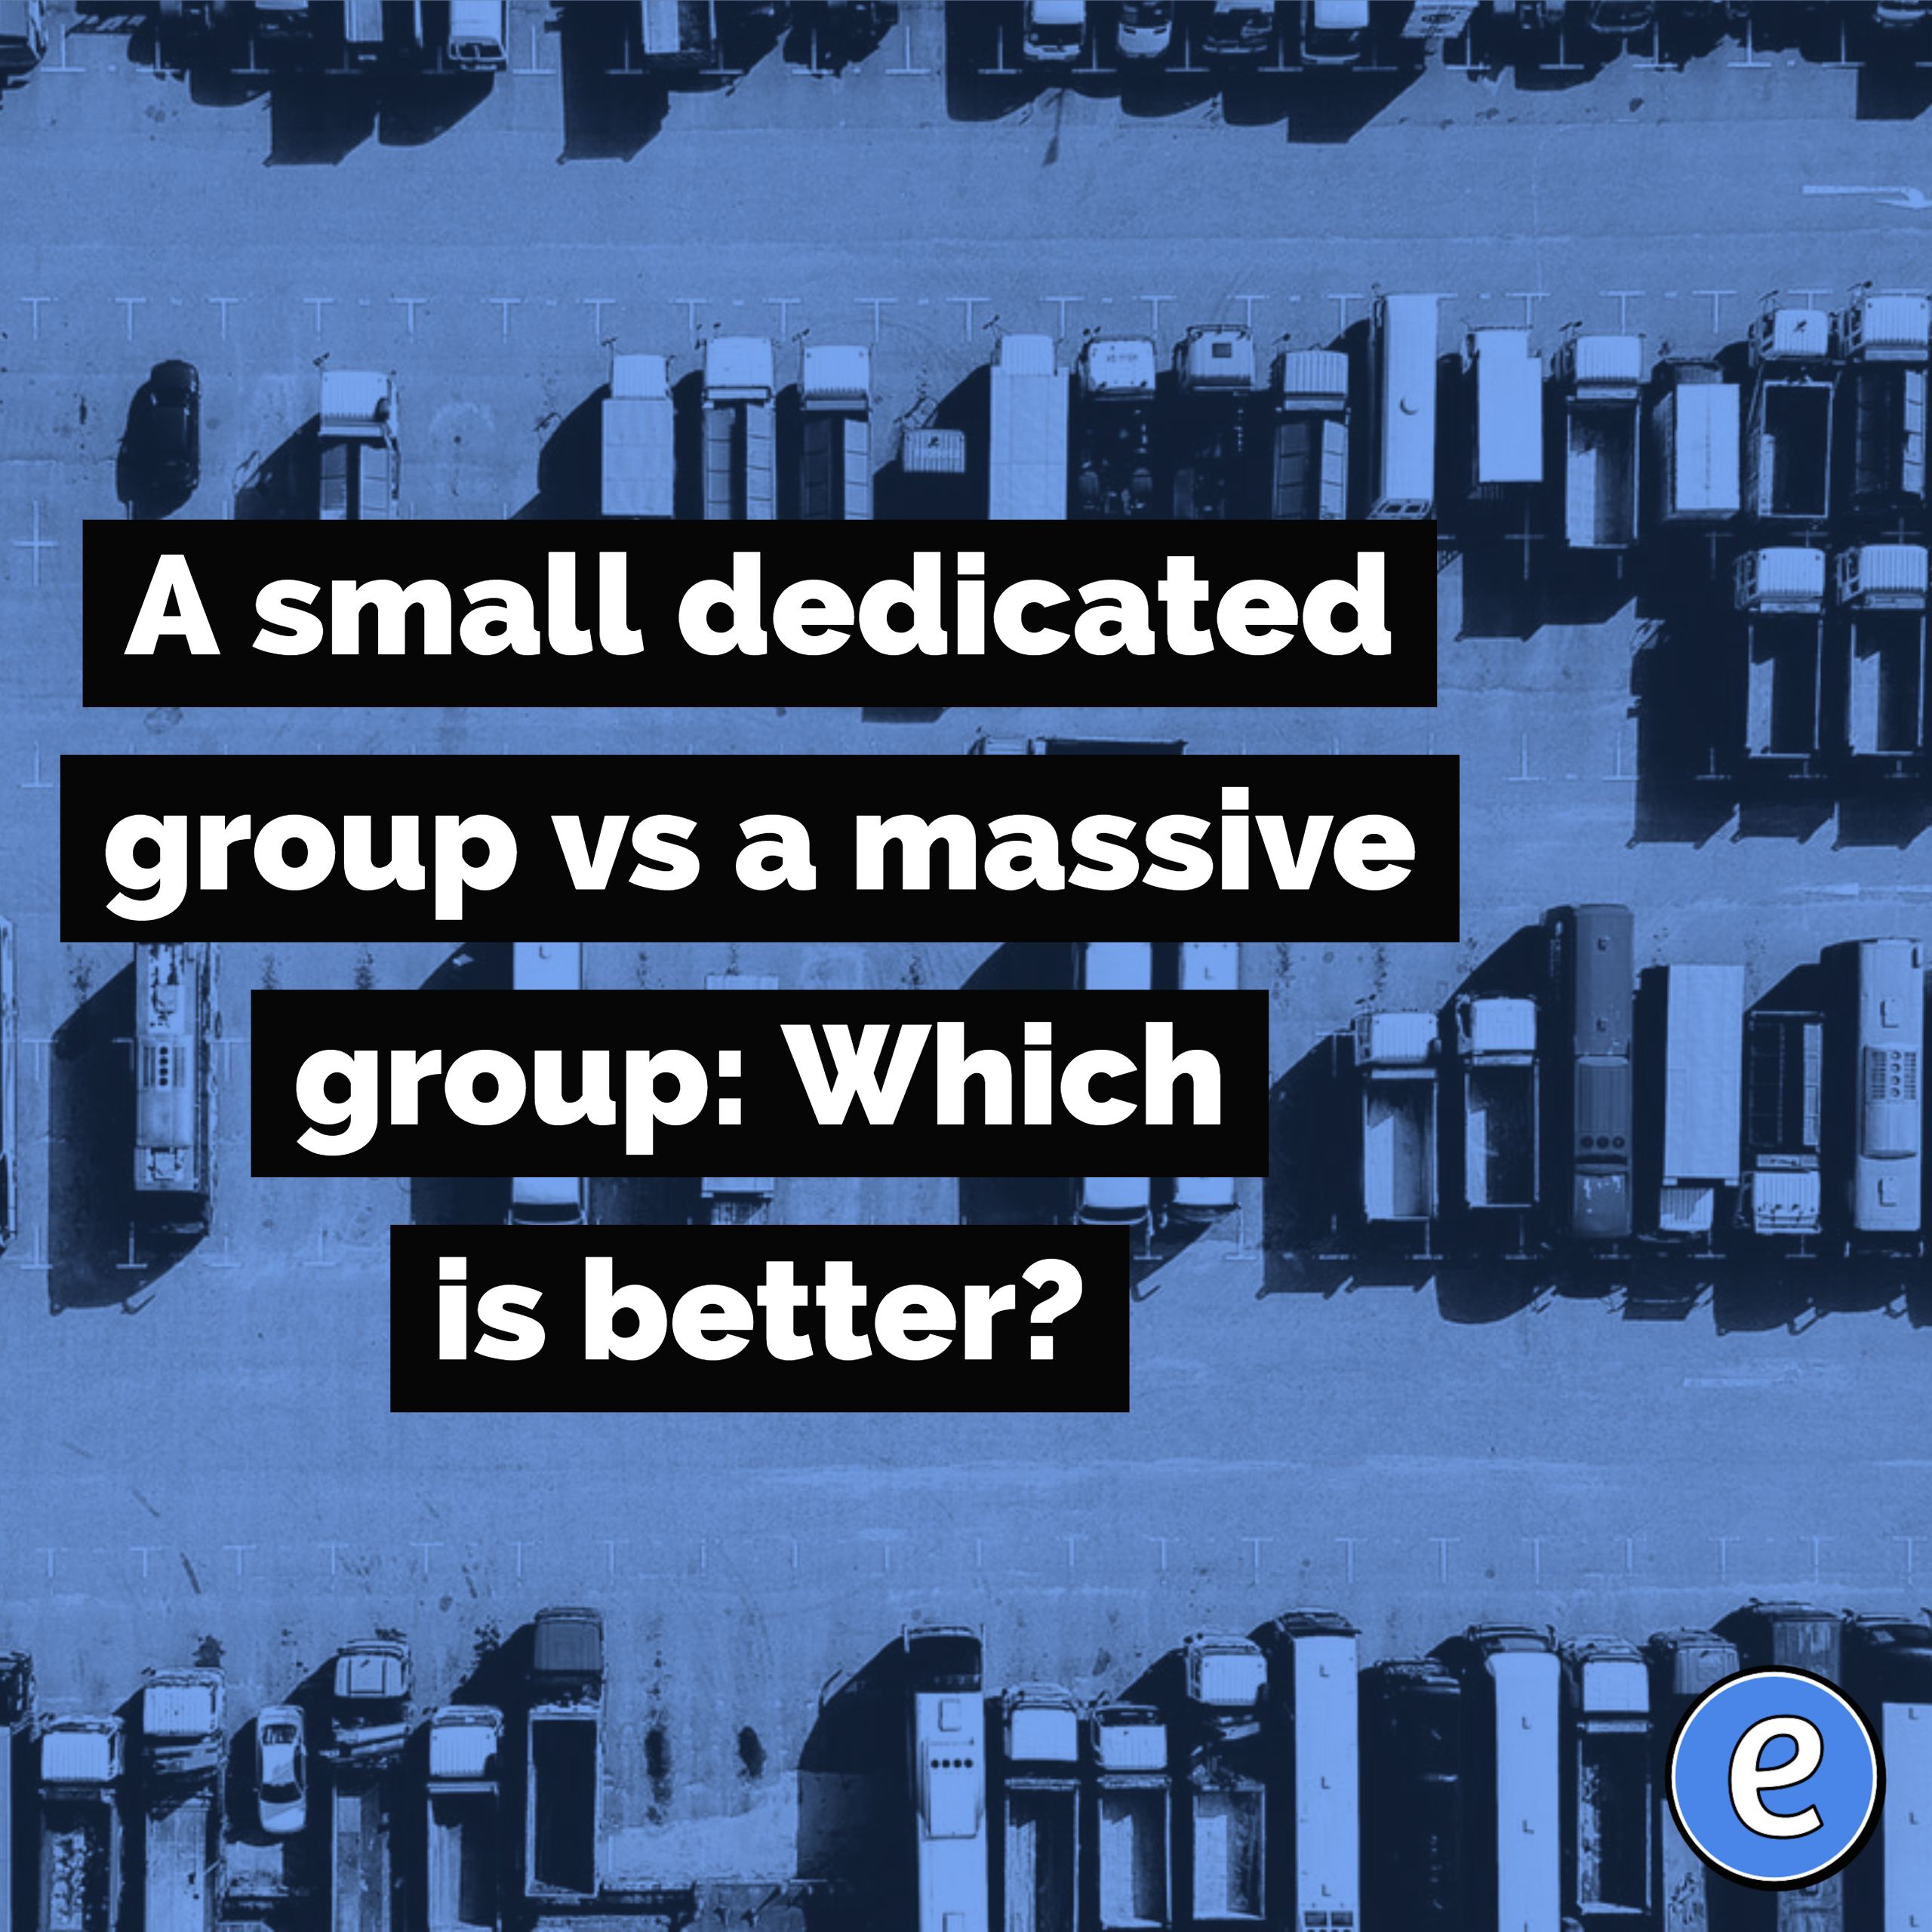 A small dedicated group vs a massive group: Which is better?